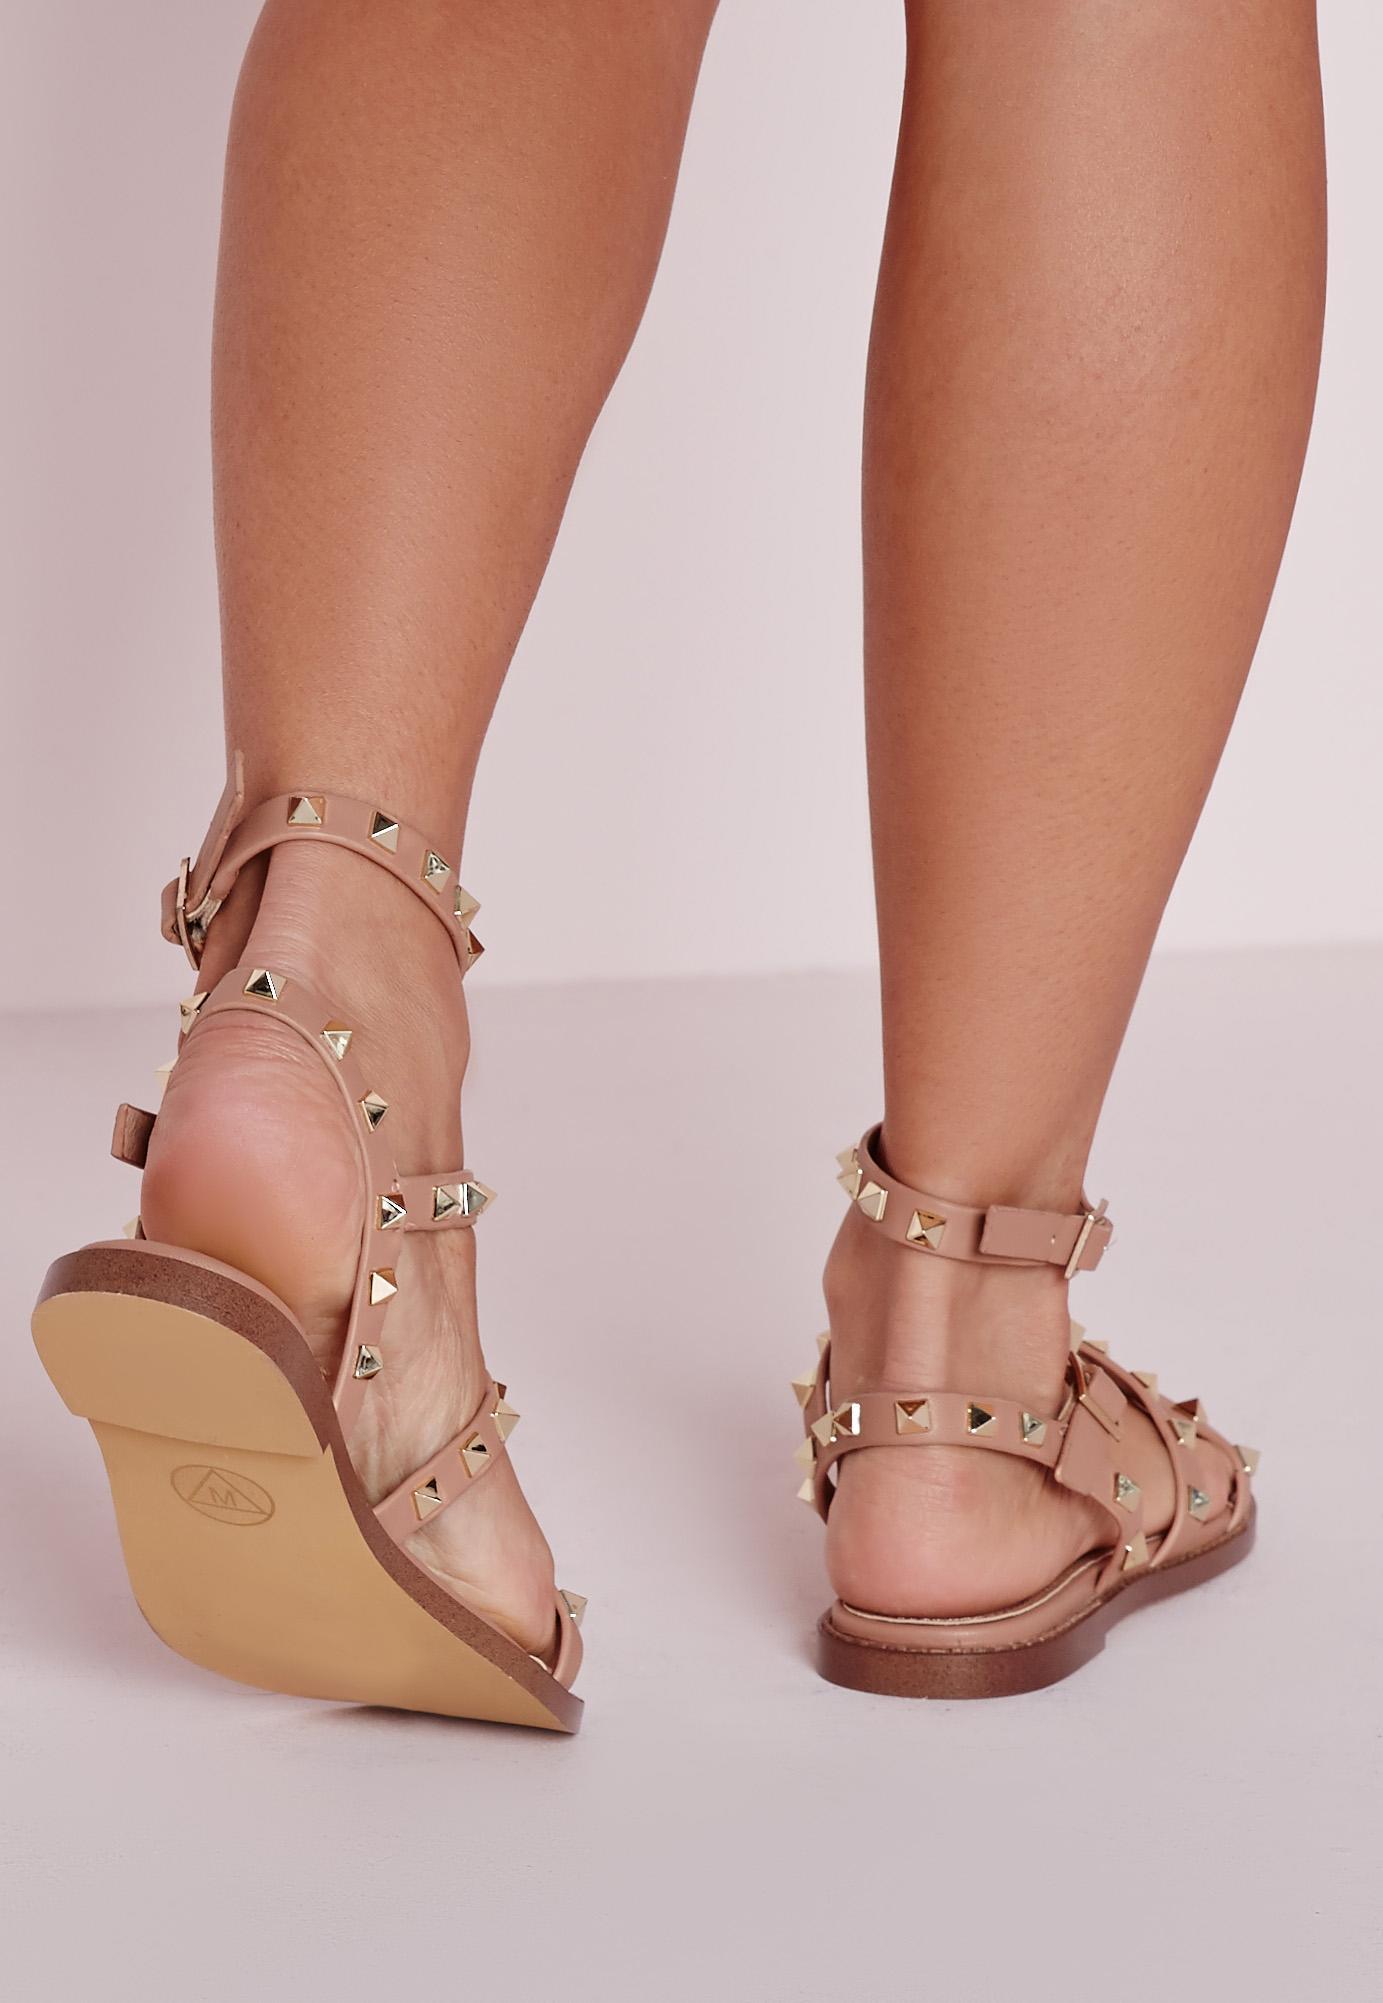 Lyst - Missguided Studded Flat Gladiator Sandals Blush in Pink